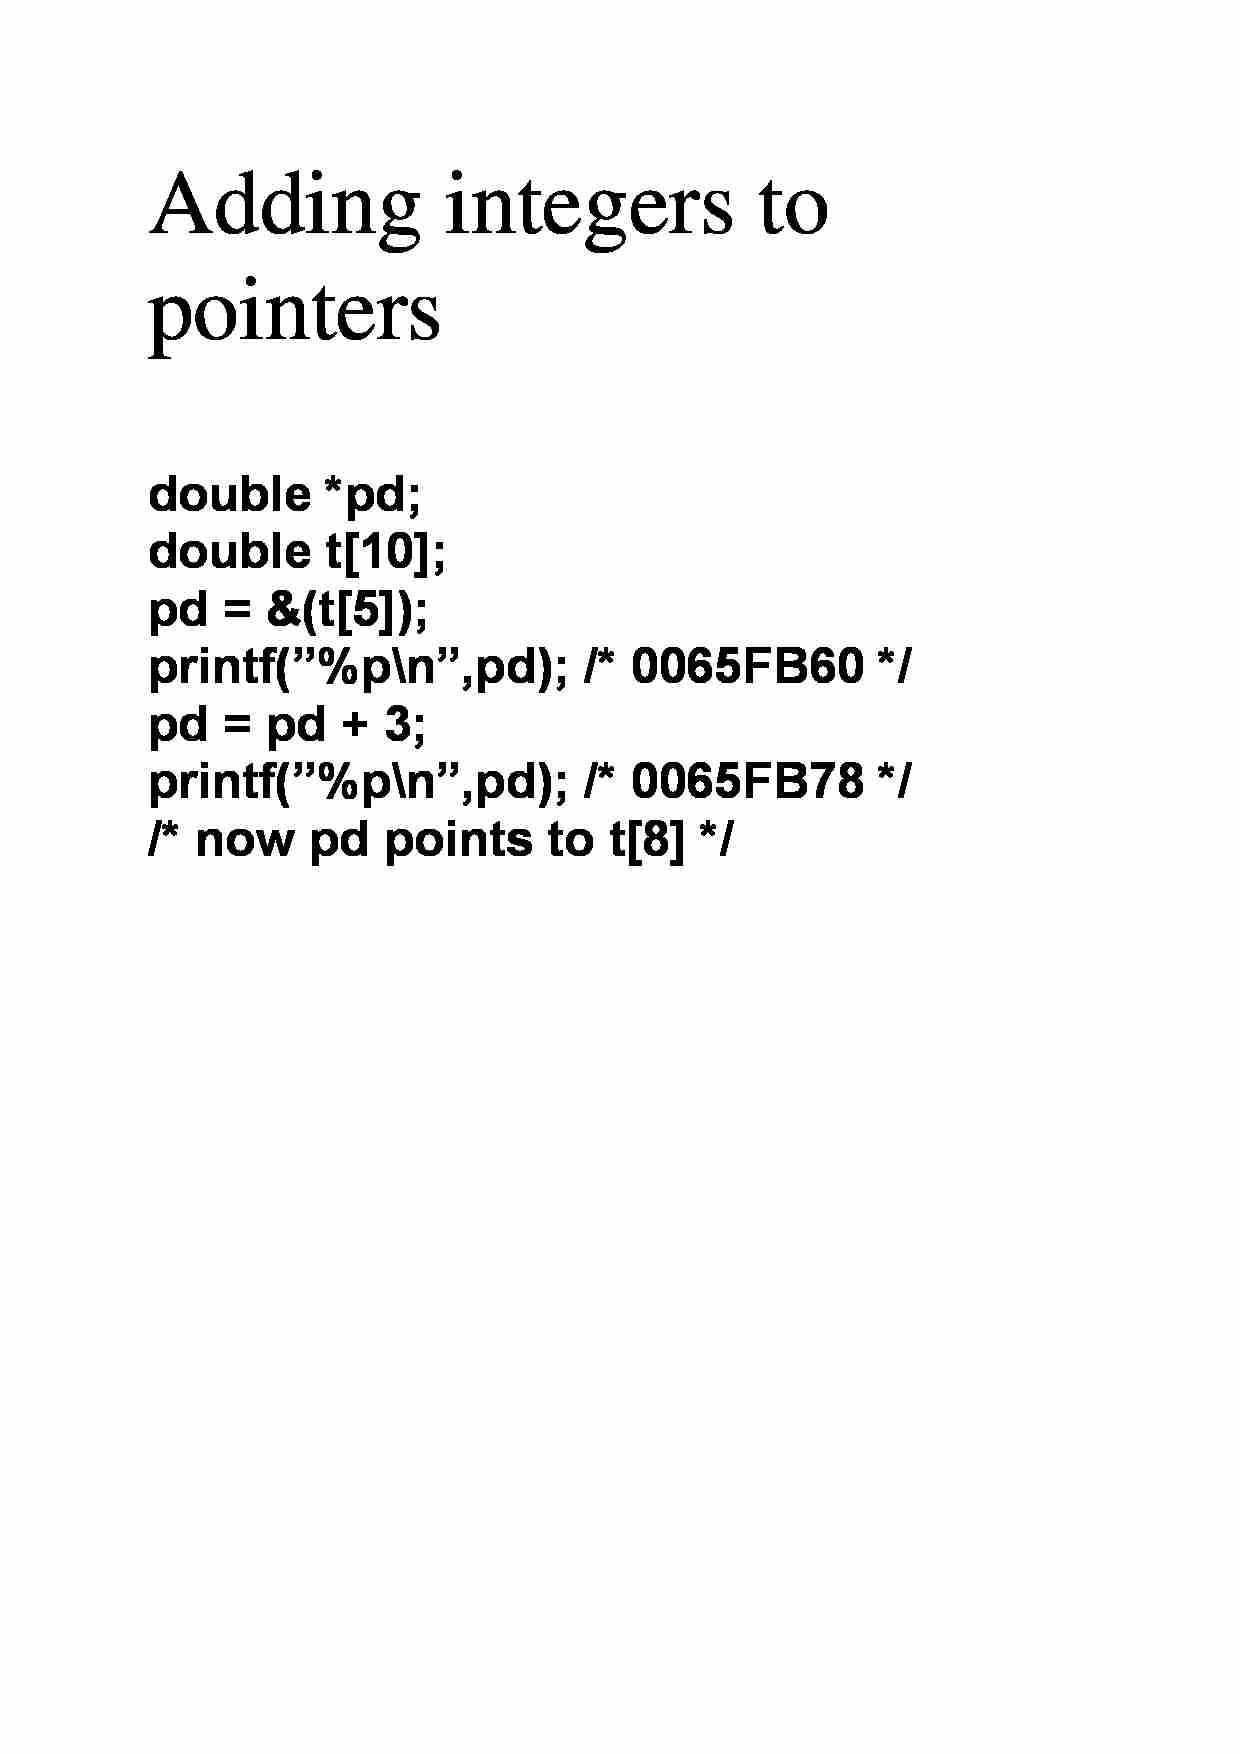 Adding integers to pointers - strona 1